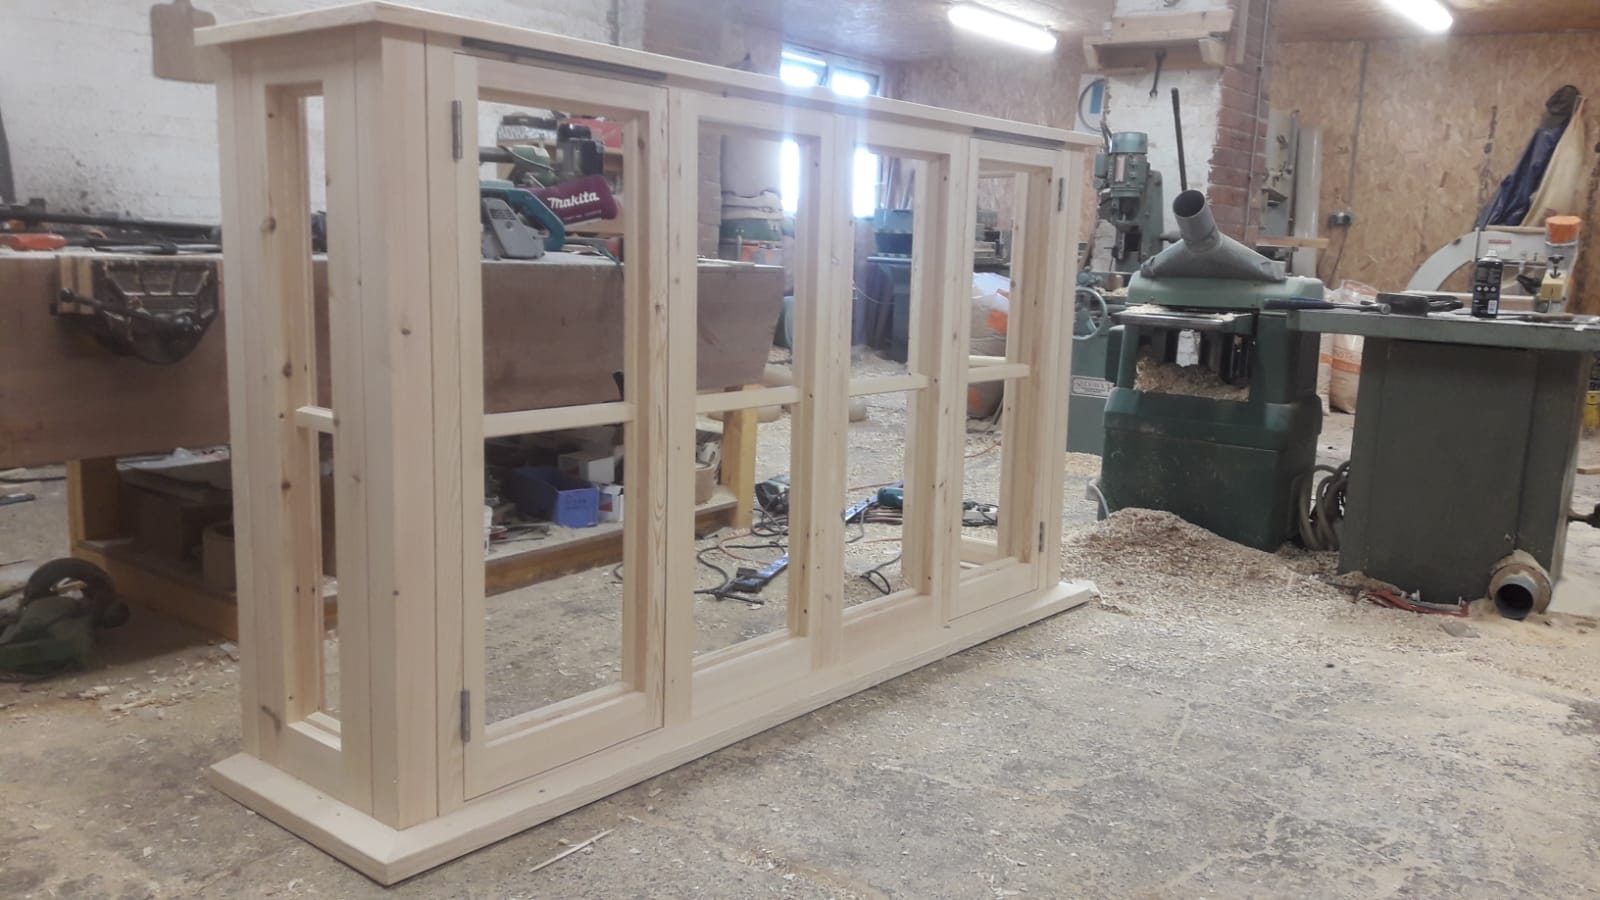 Joinery services